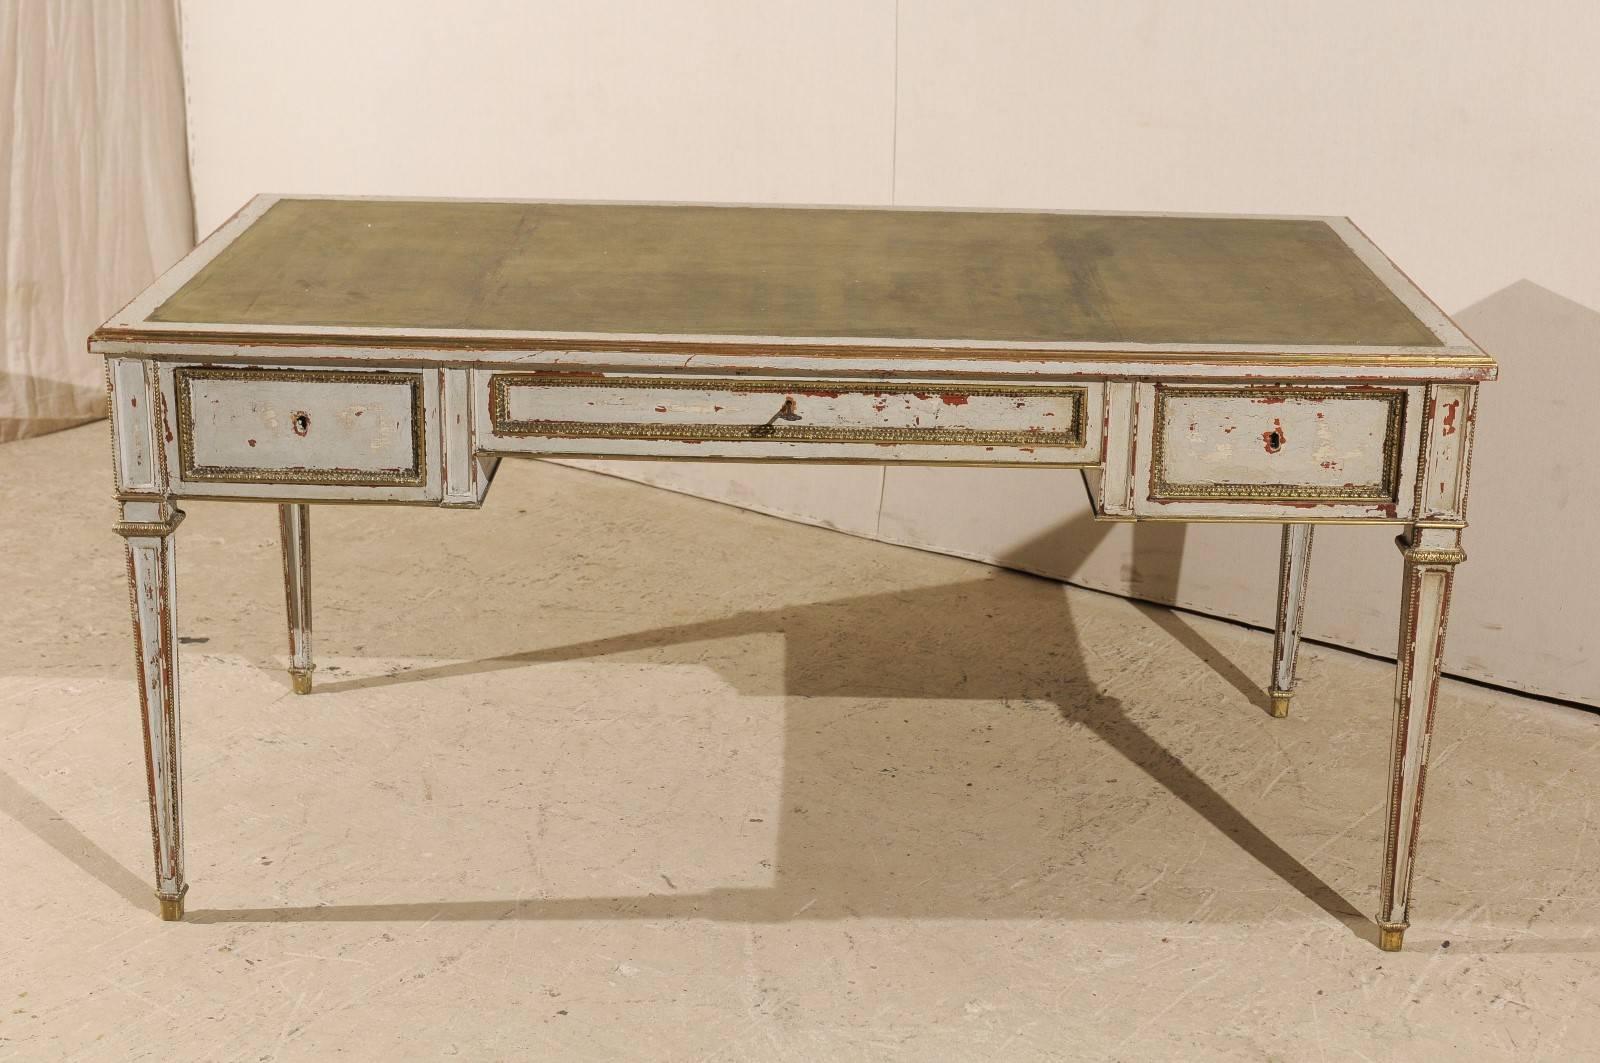 A French painted wood desk. This French three-drawer desk from the 20th century features a green leather top that has embossed edges. The desk is raised on four tapered legs. This piece is grey-white throughout with some crackled paint showing a red